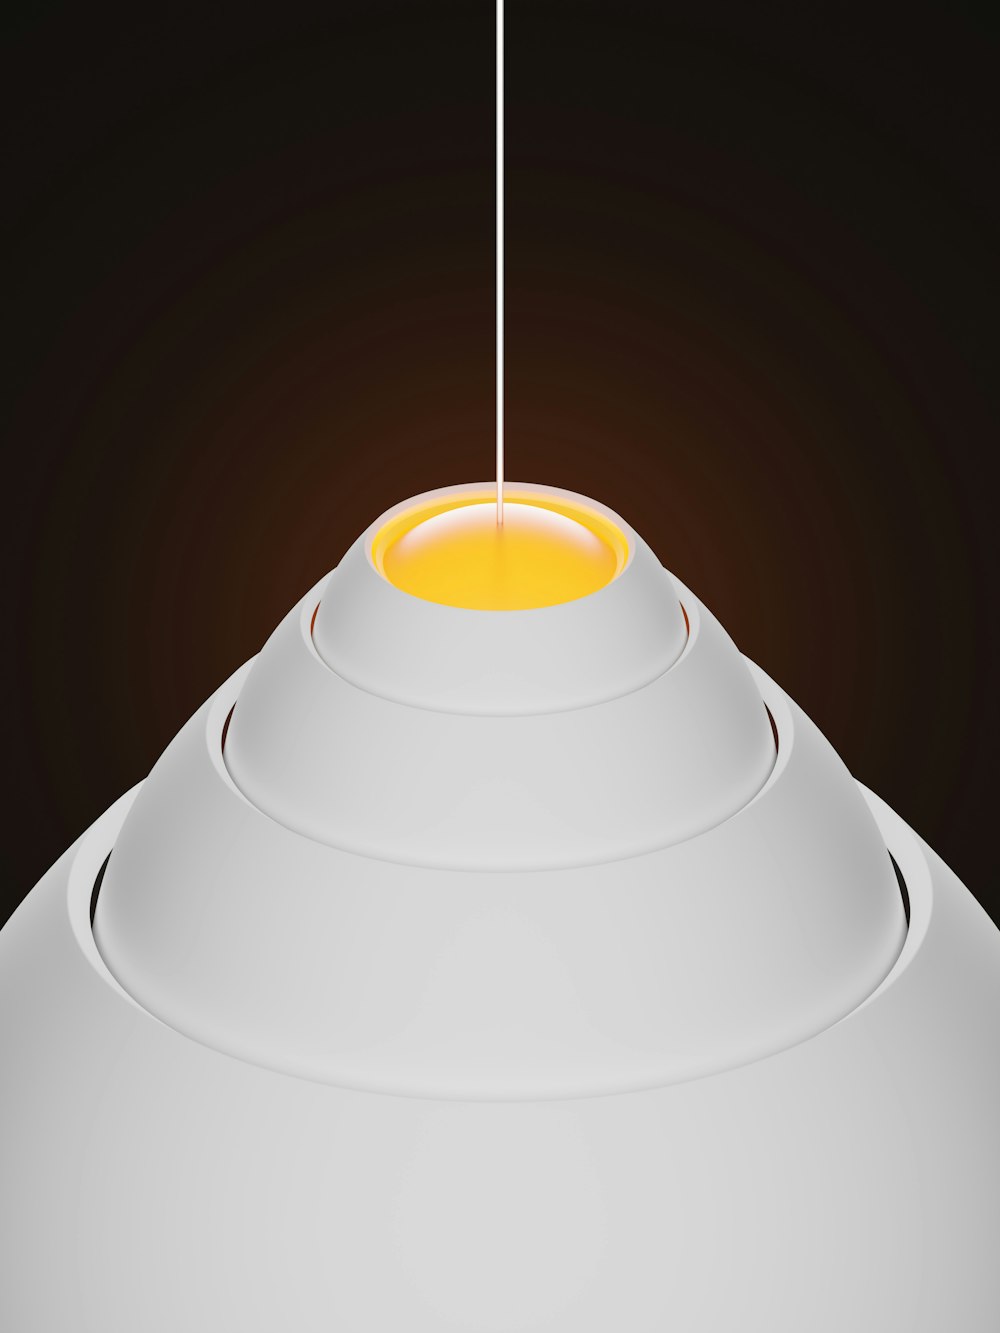 a white object with a yellow light on top of it